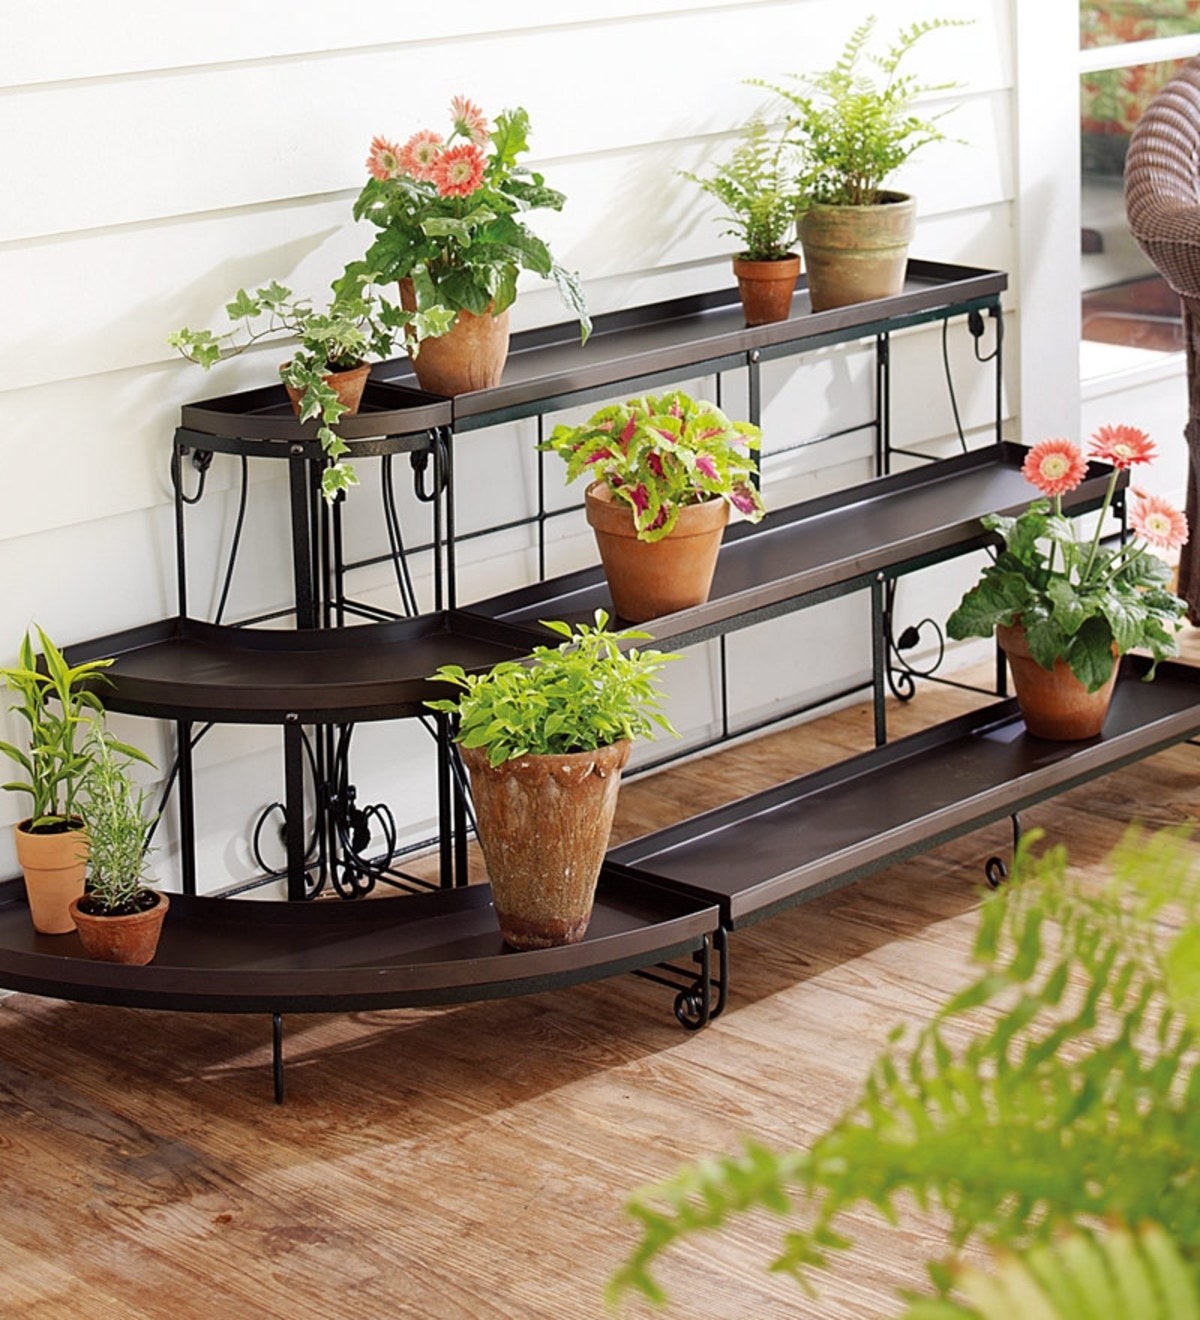 Tiered embellished steel plant stands and zinc plant stand liners